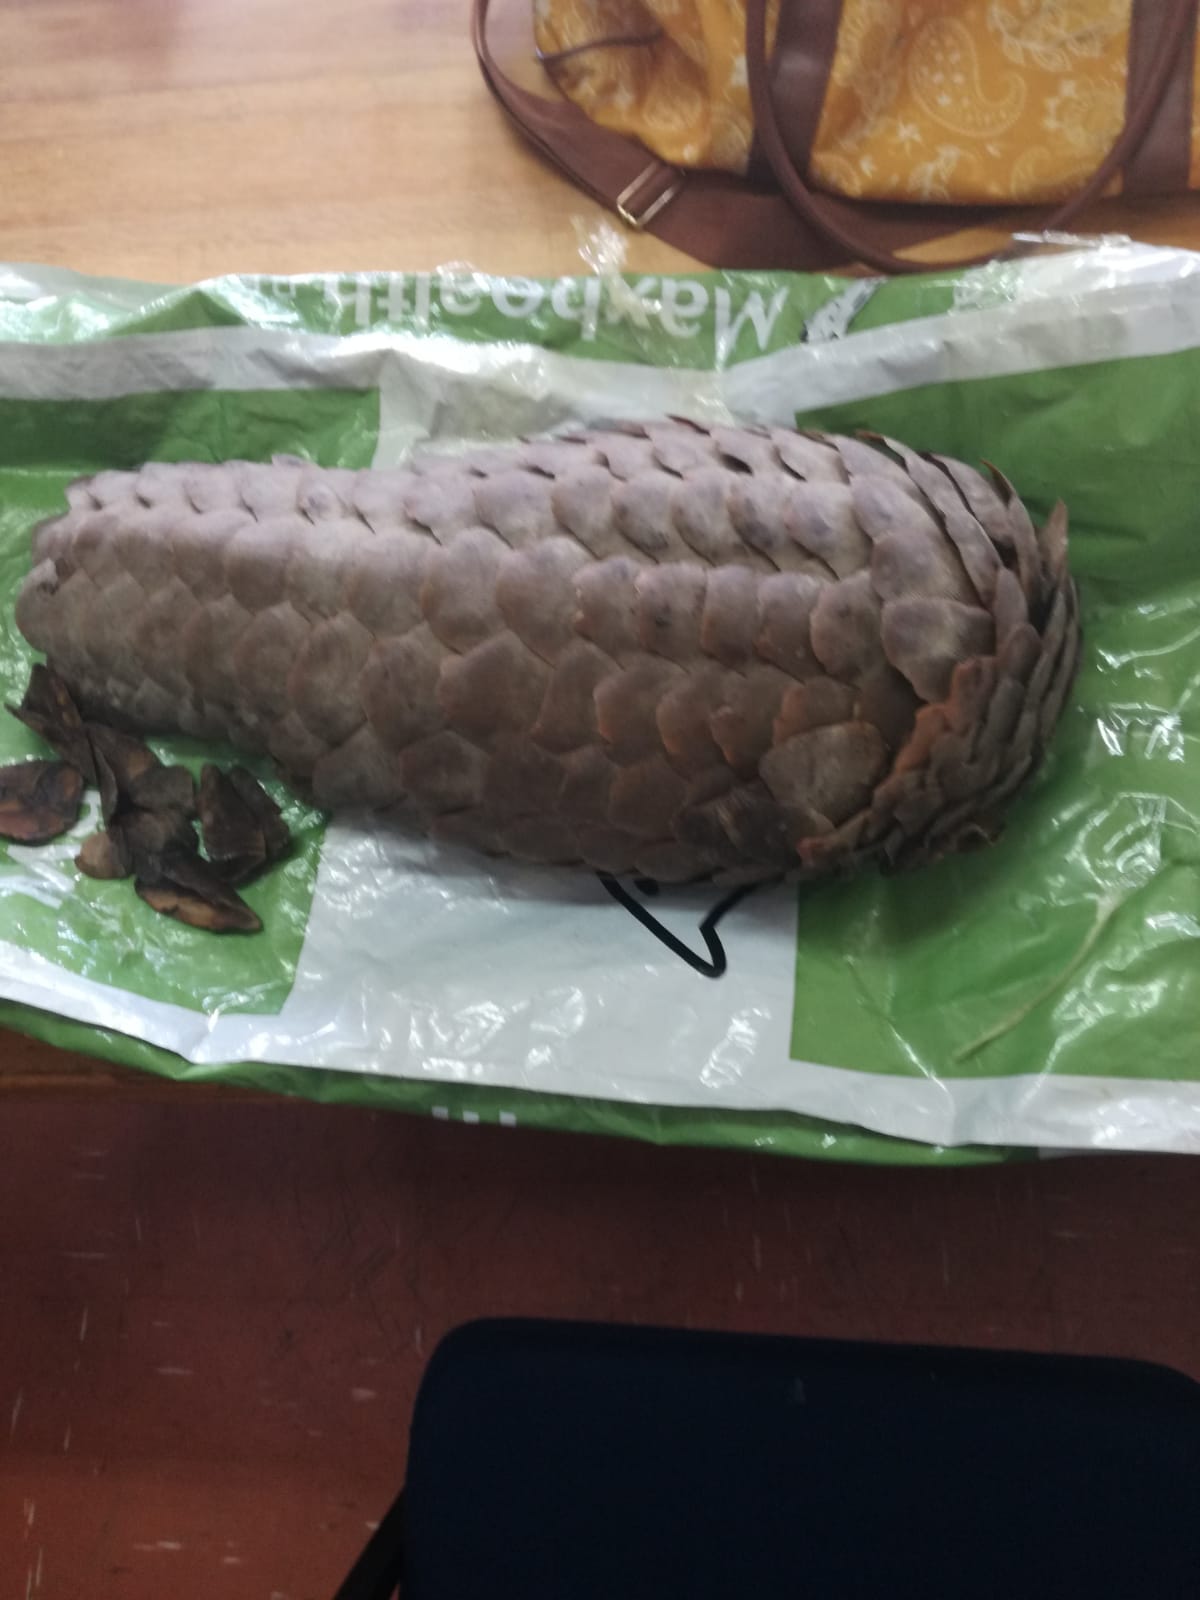 Man arrested for possession of Pangolin skin